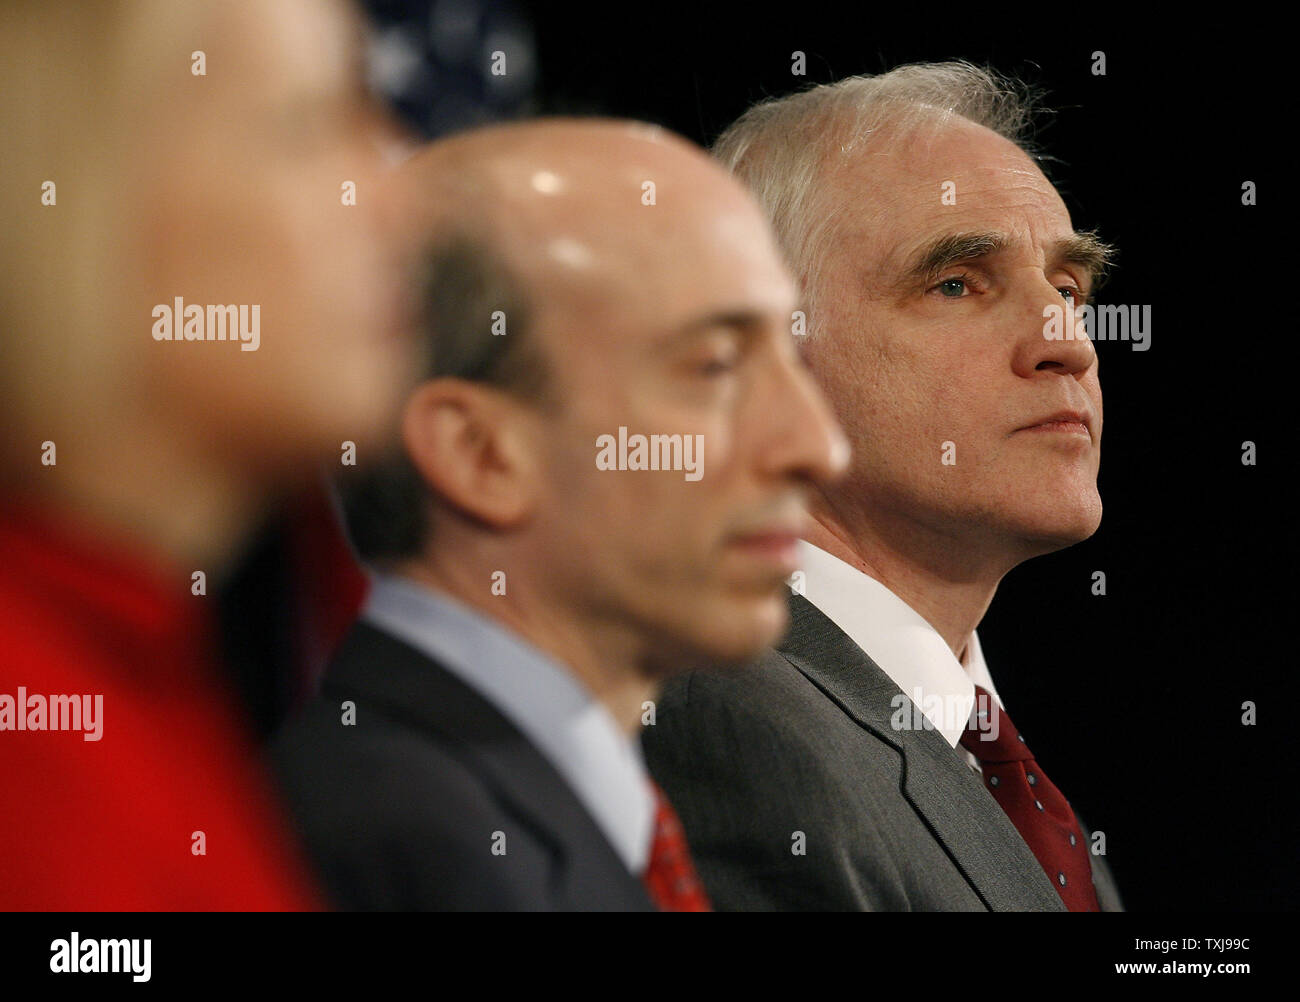 Daniel Tarullo (R), a new member of the Federal Reserve board, stands with Gary Gensler (C), the new head of the Commodity Futures Trading Commission, and Mary Schapiro, the new head the of the Securities and Exchange Commission, during a news conference at which President-elect Barack Obama introduced the three on December 18, 2008 in Chicago.  By appointing these non-cabinet positions at this early date, Obama stressed the importance of reforming regulations governing Wall Street to prevent future economic crises. (UPI Photo/Brian Kersey) Stock Photo